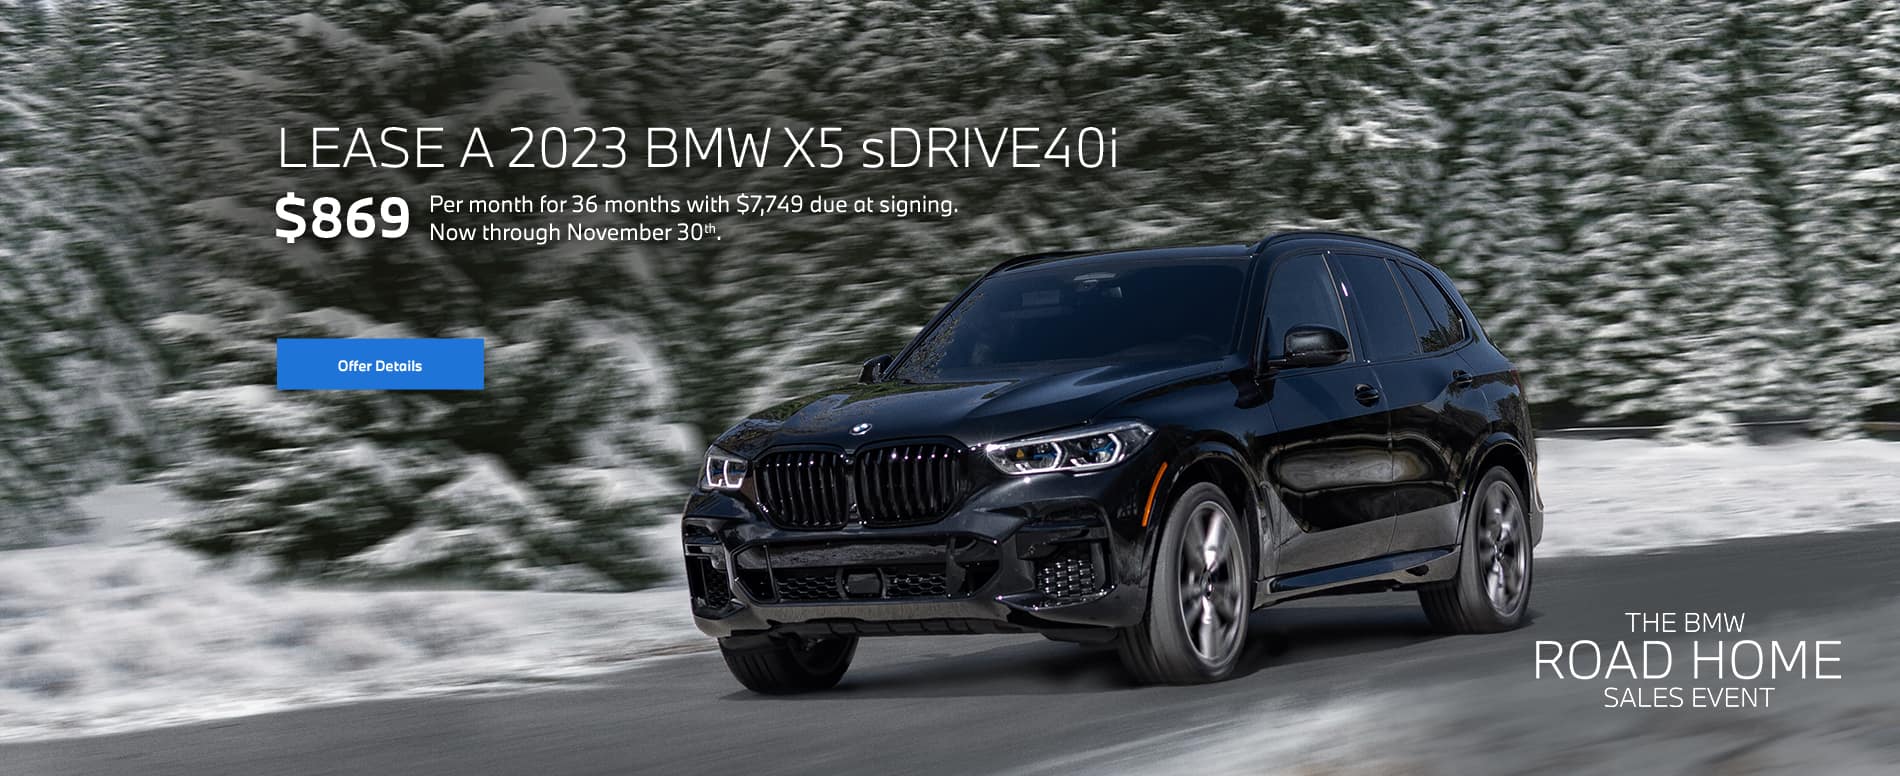 2023 X5 lease starting at $869 per month for 36 months